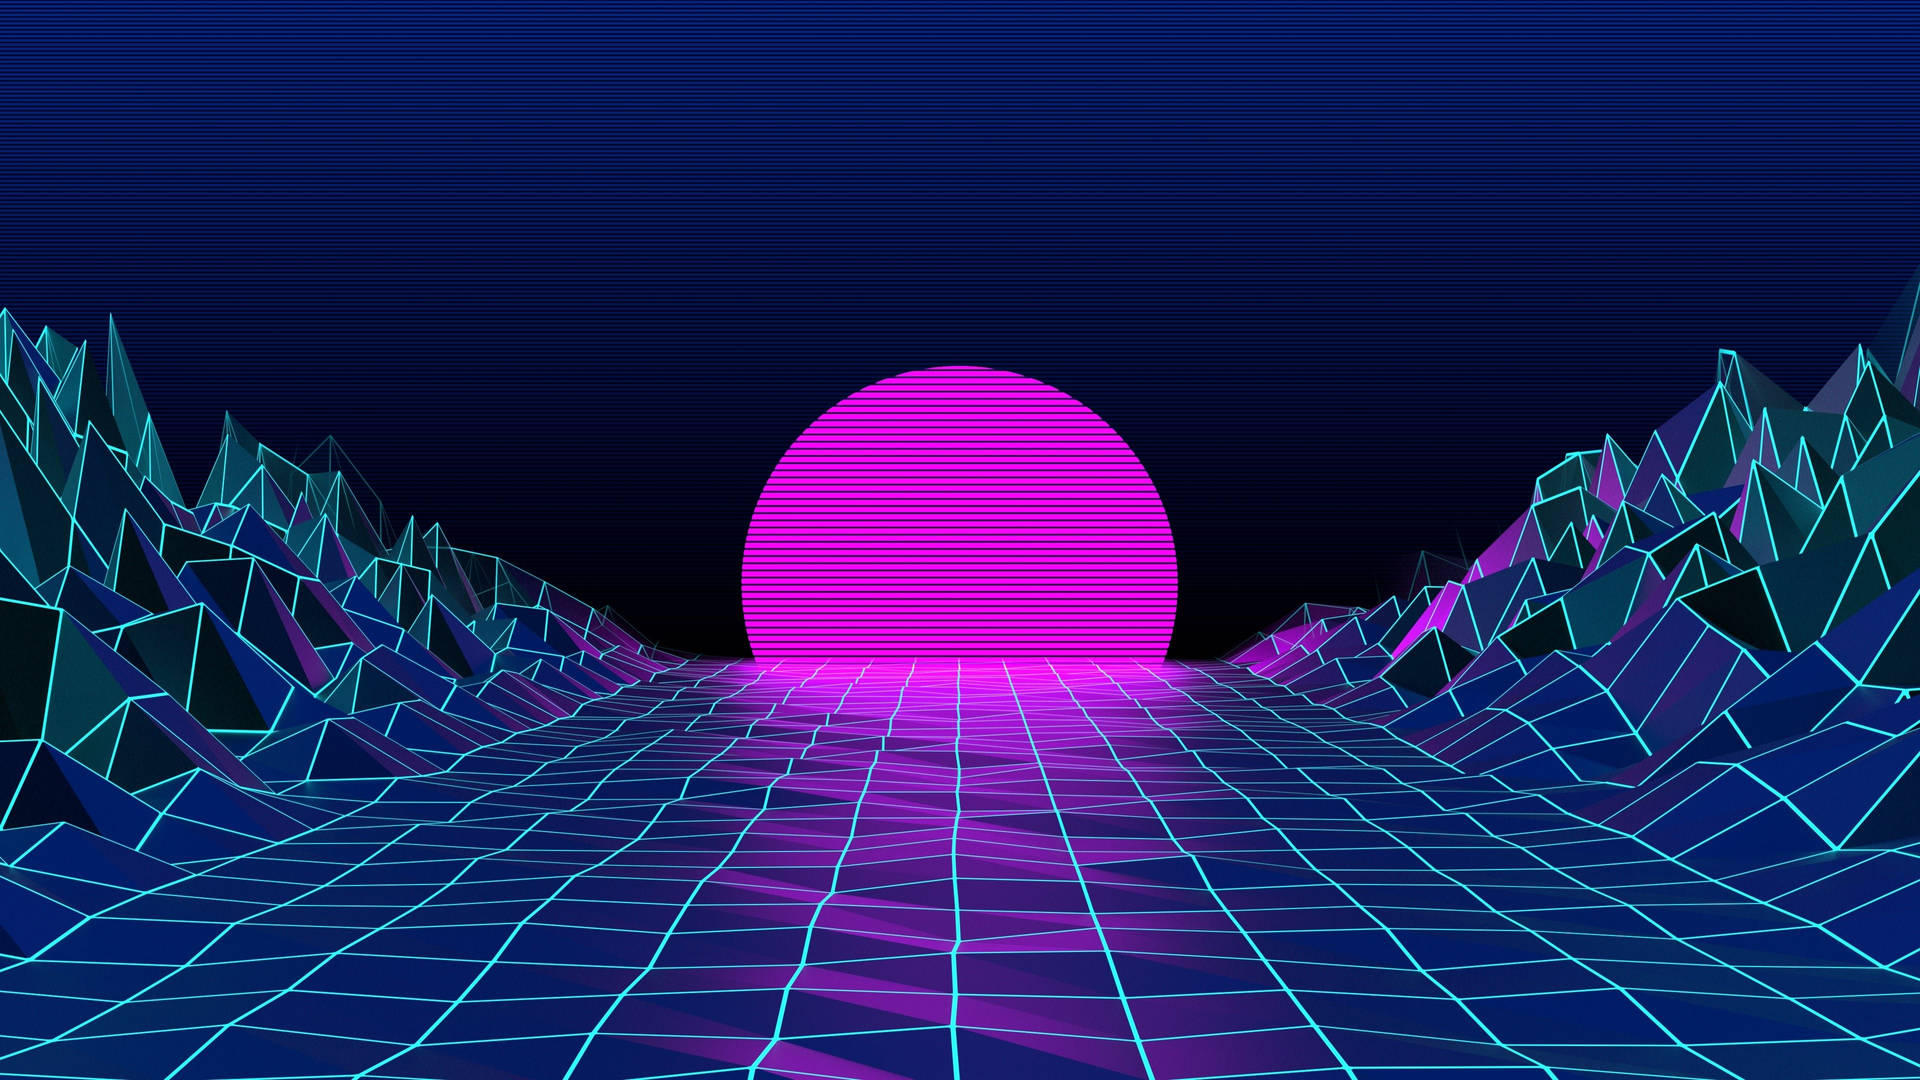 Free Retrowave Wallpaper Downloads, [200+] Retrowave Wallpapers for FREE |  